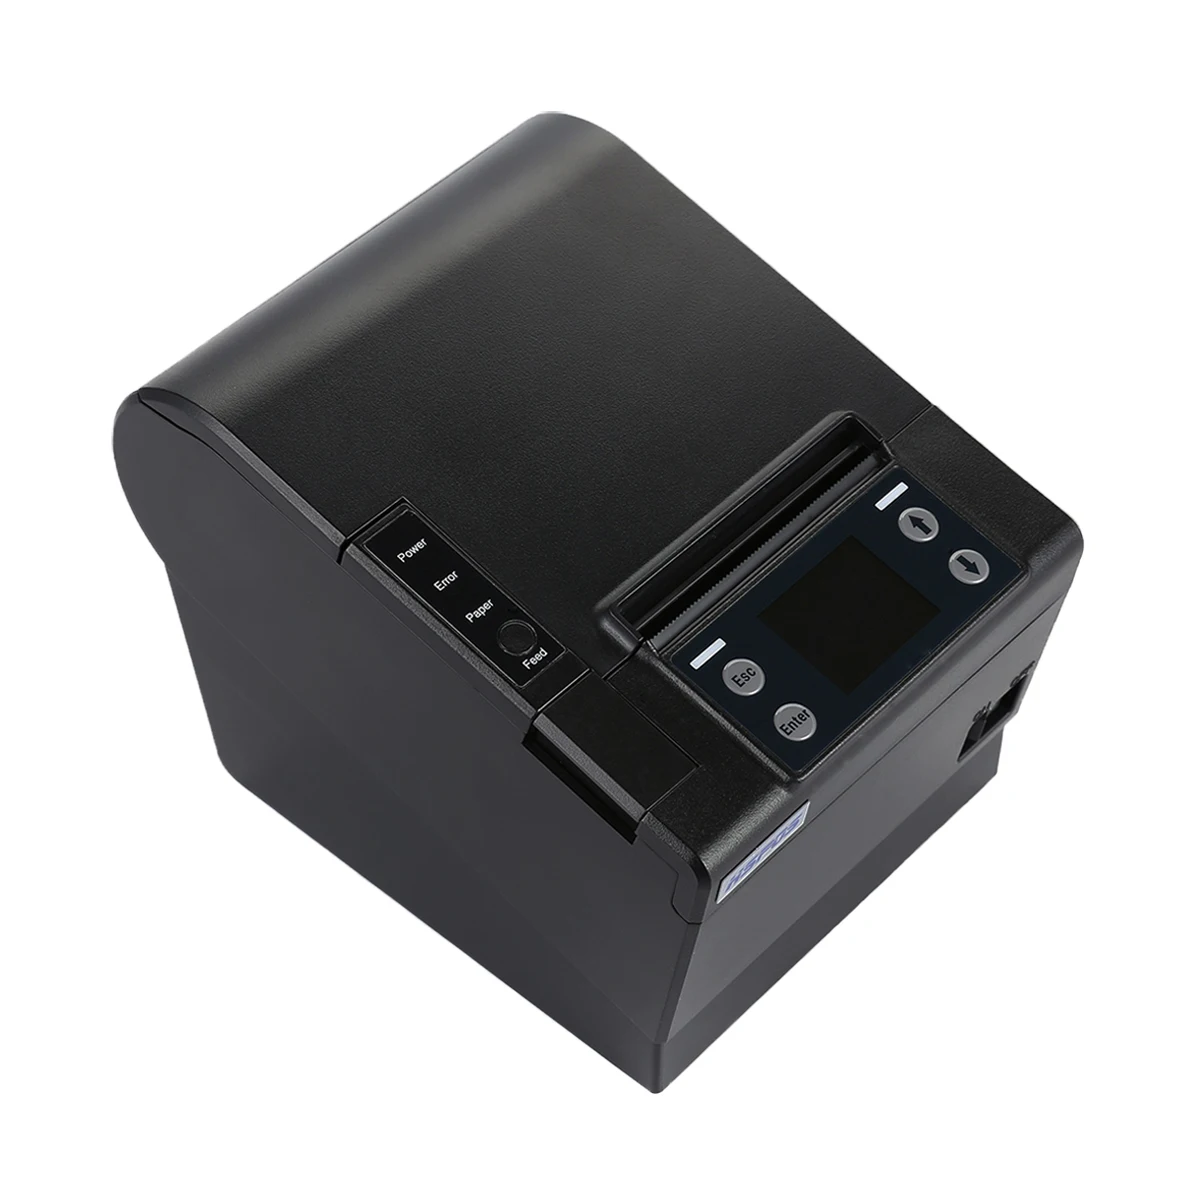 

HSPOS Company Hot Sale Wireless 80mm POS Thermal Printer rp80w 3inch Thermal pos Printer Support USB+Lan+WIFI+GPRS For store